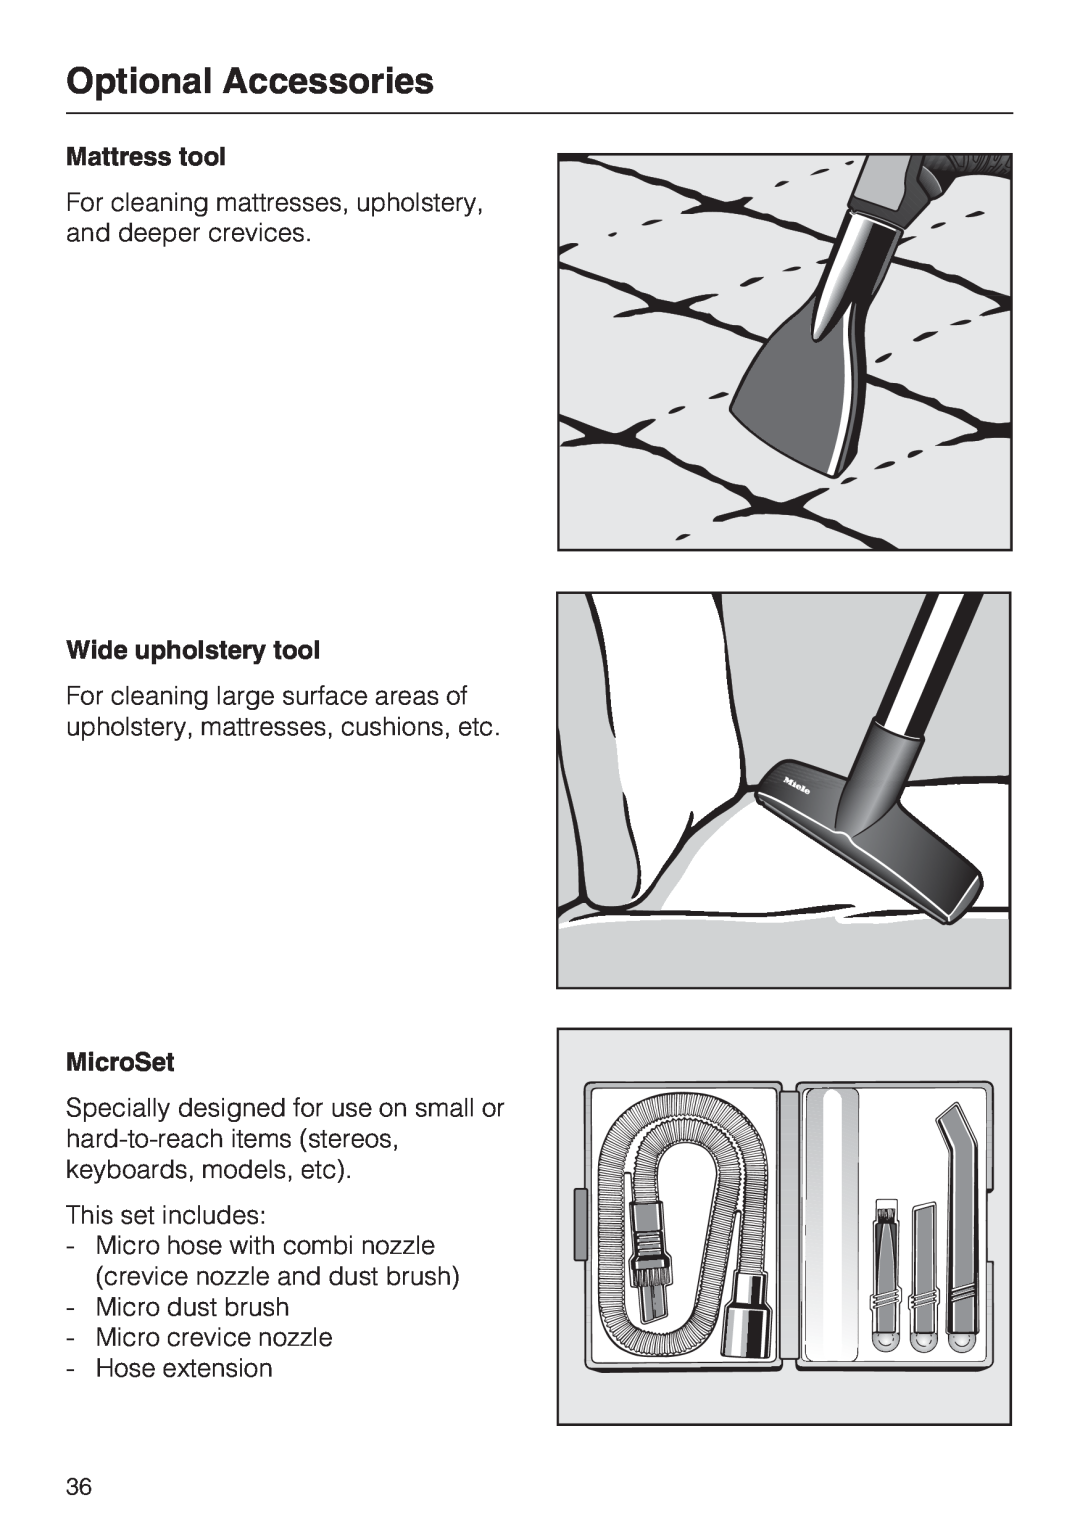 Miele S 7000 operating instructions Mattress tool, Wide upholstery tool, MicroSet, Optional Accessories 